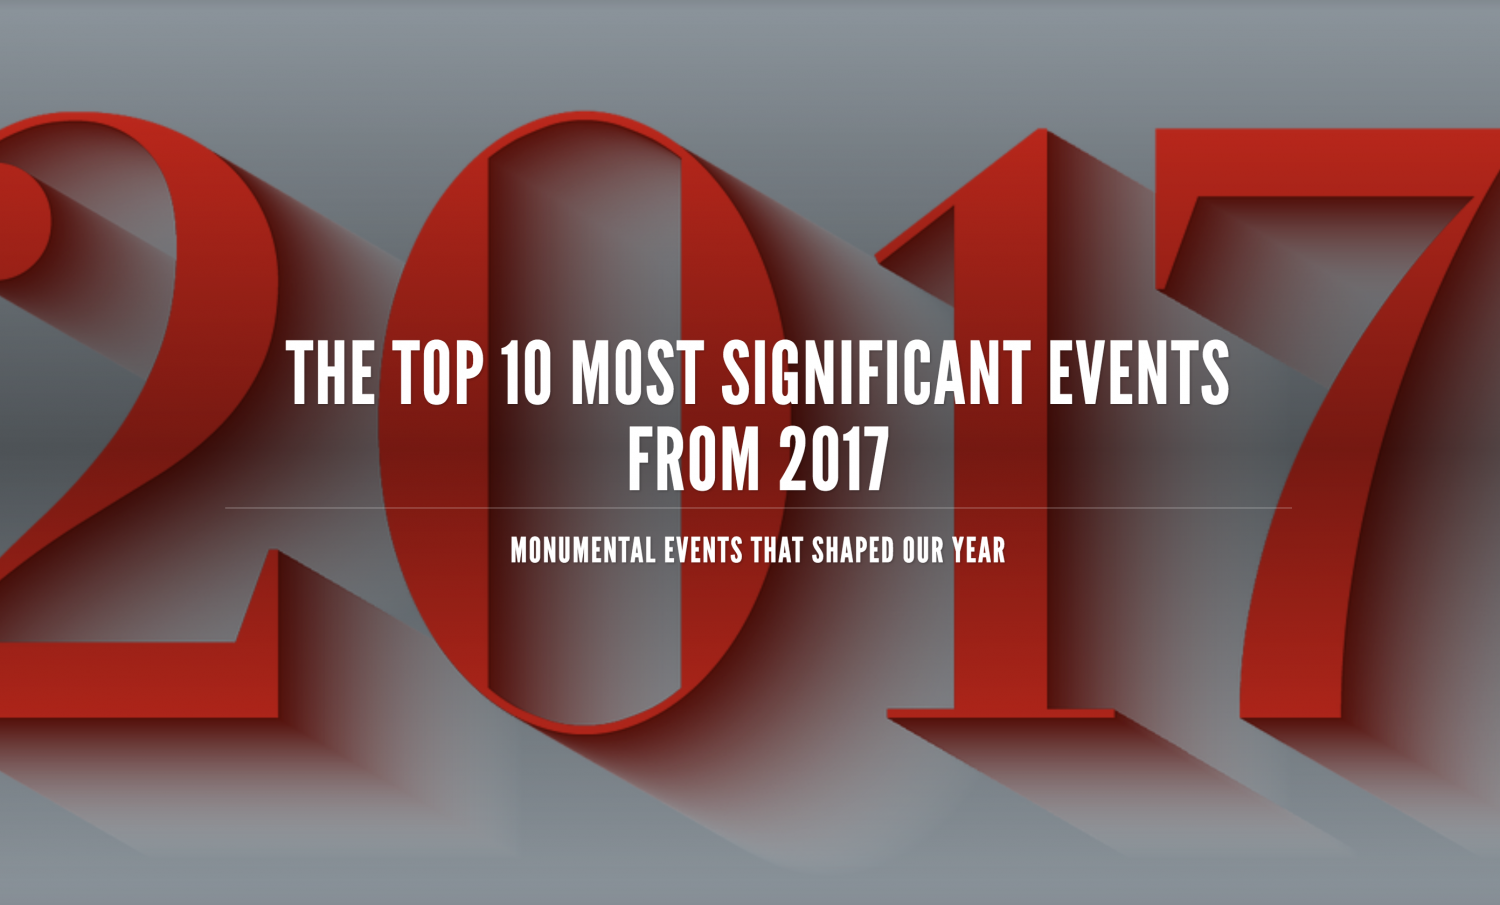 The top ten most significant events from 2017